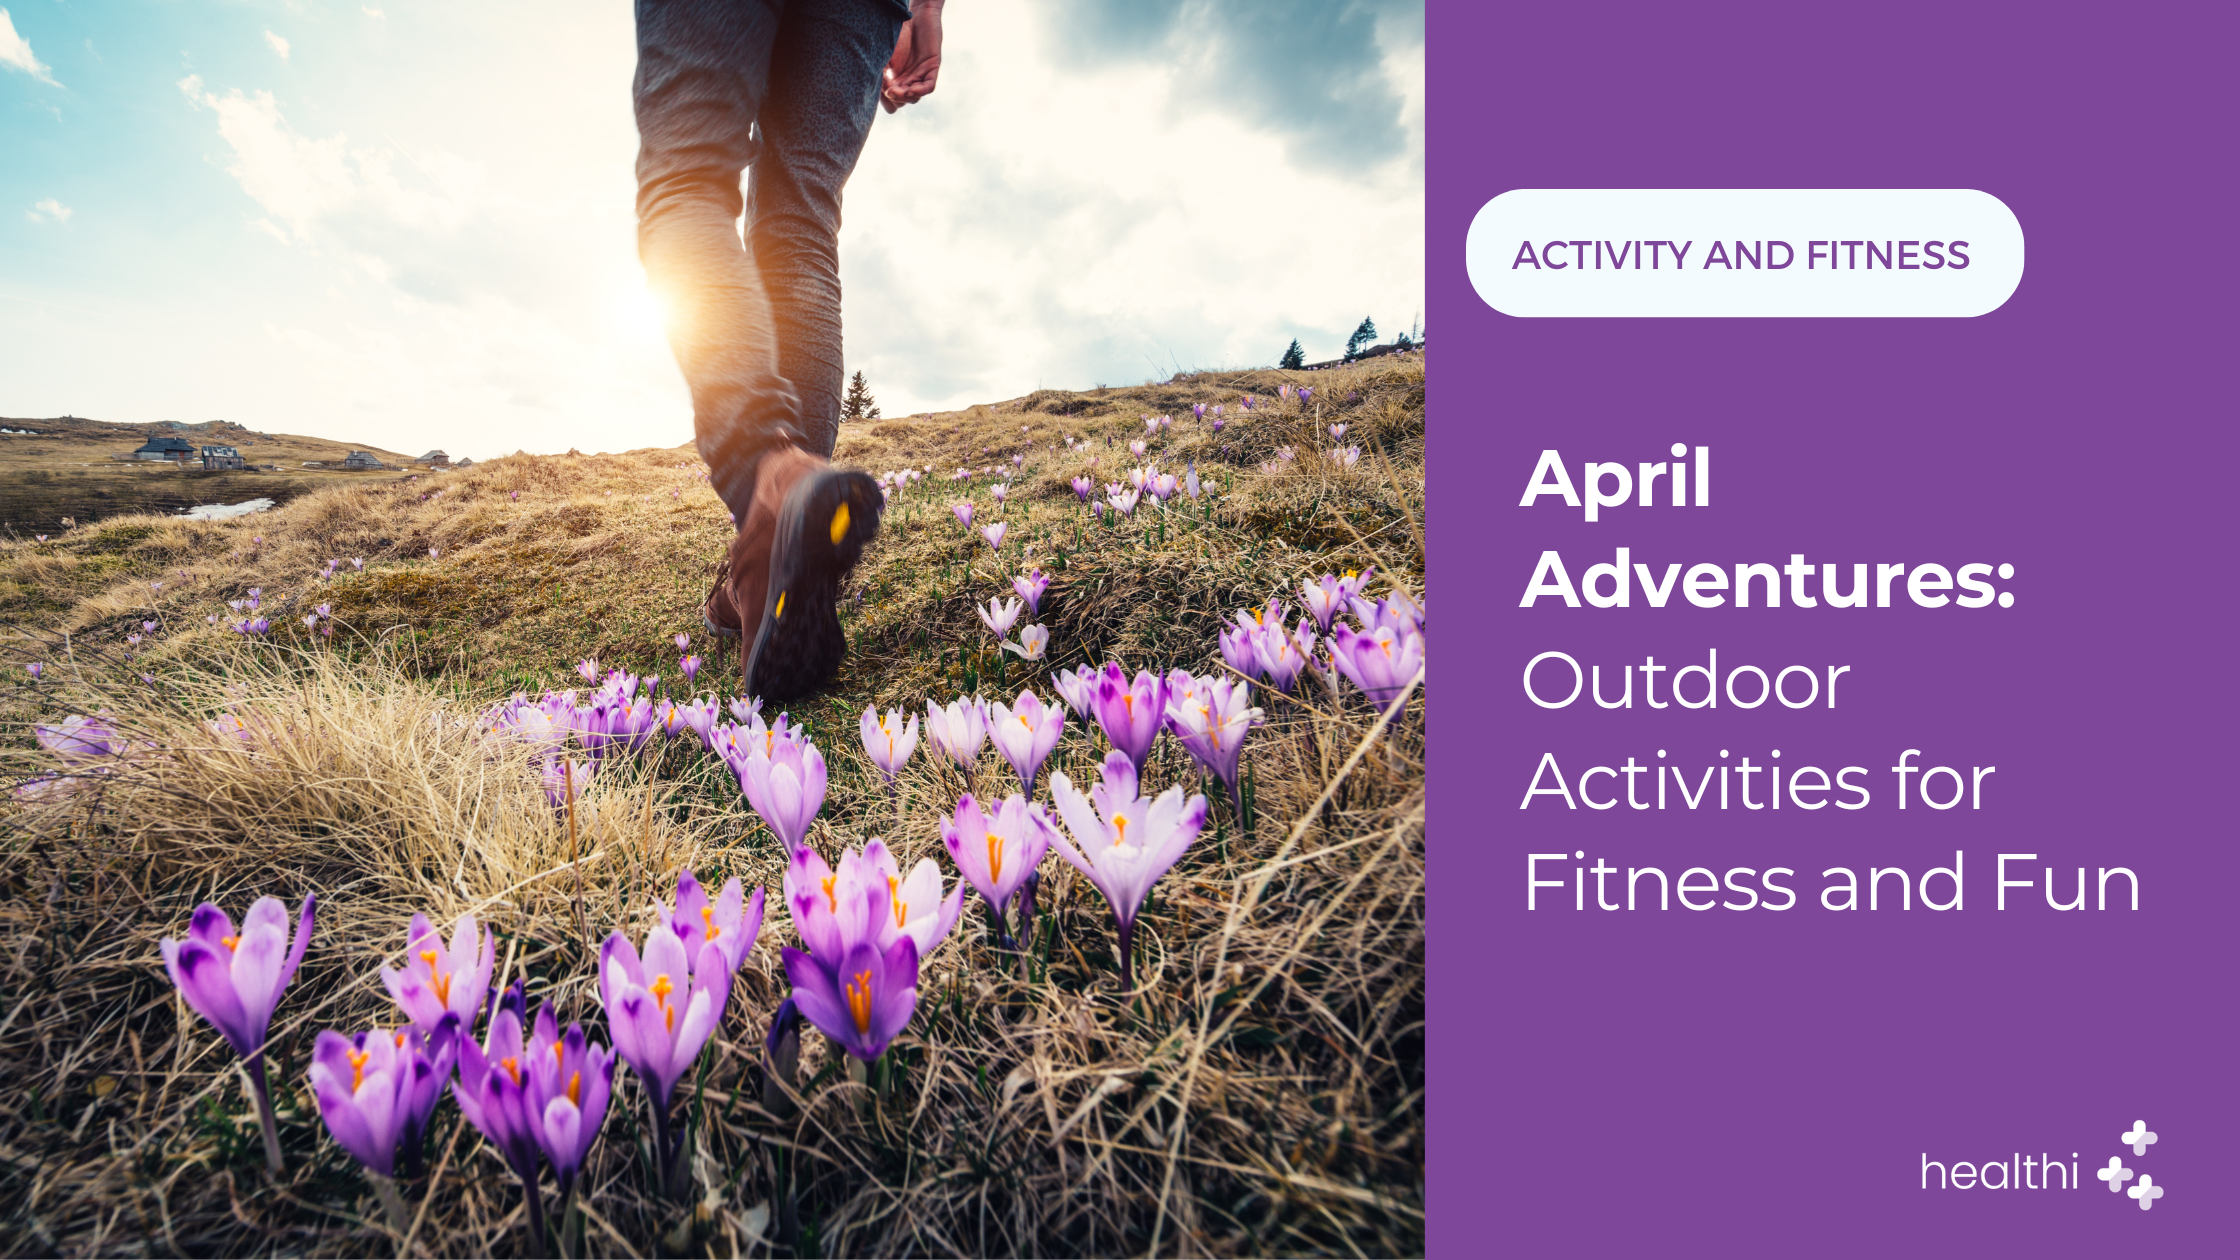 April Adventures: Outdoor Activities for Fitness and Fun - Healthi